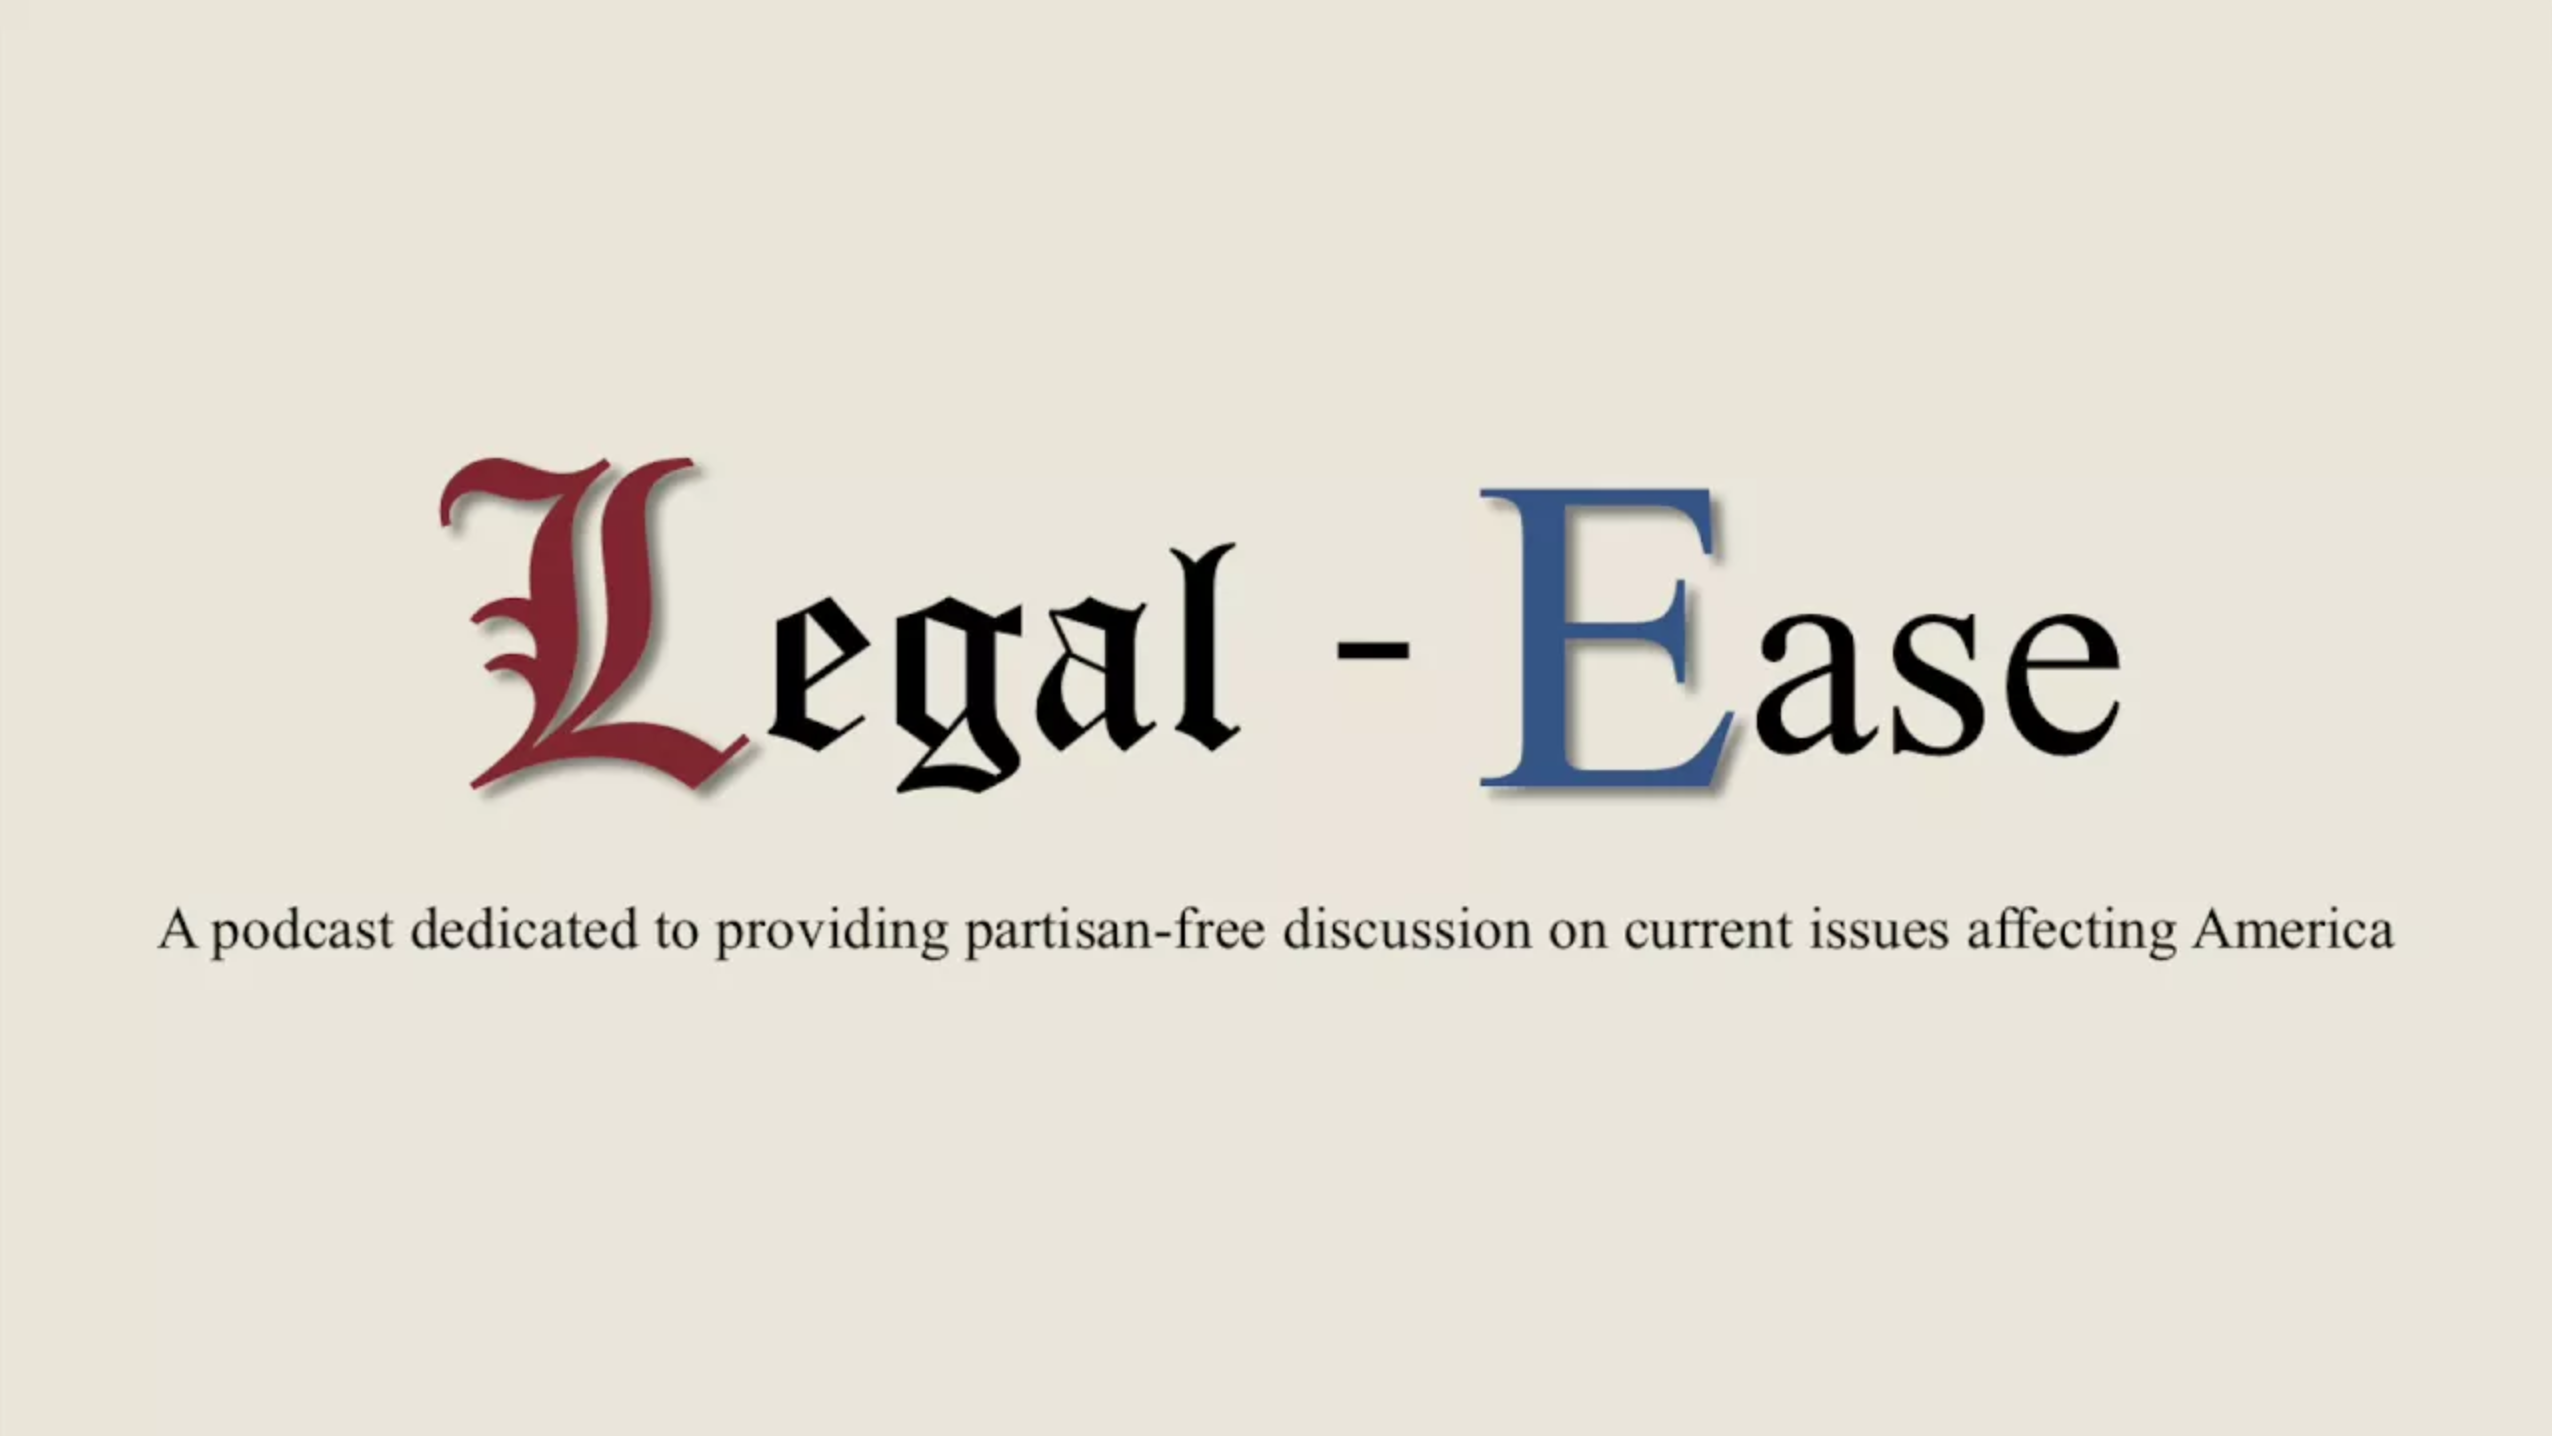 Legal Ease Podcast